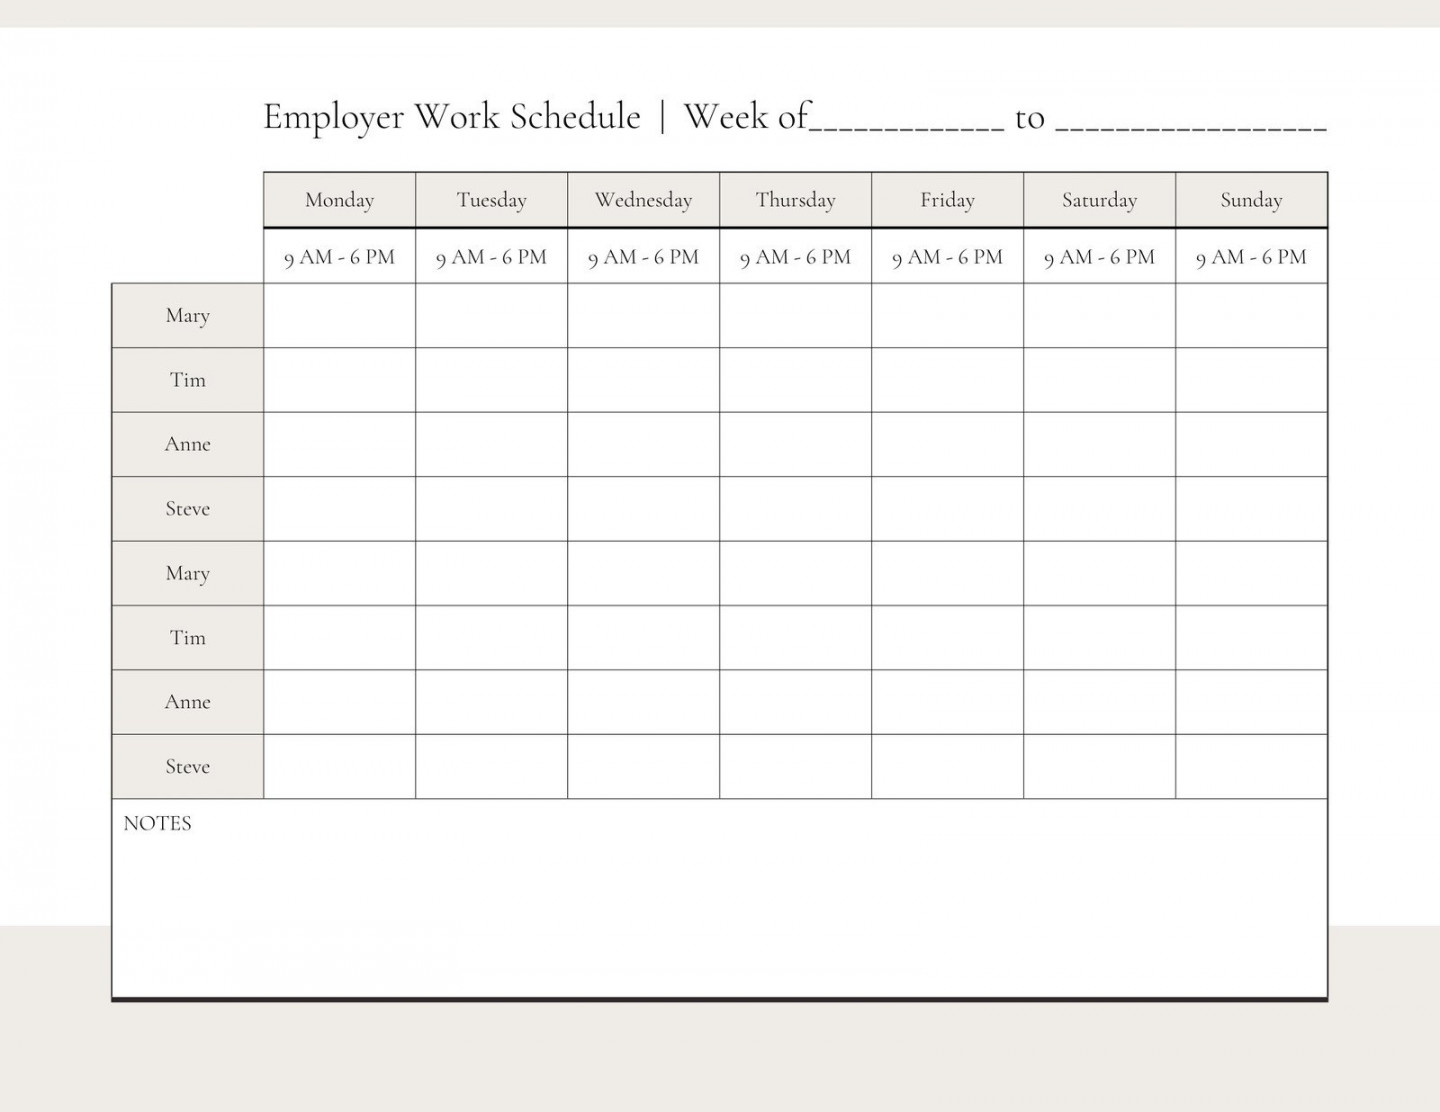 Free and customizable timetable templates